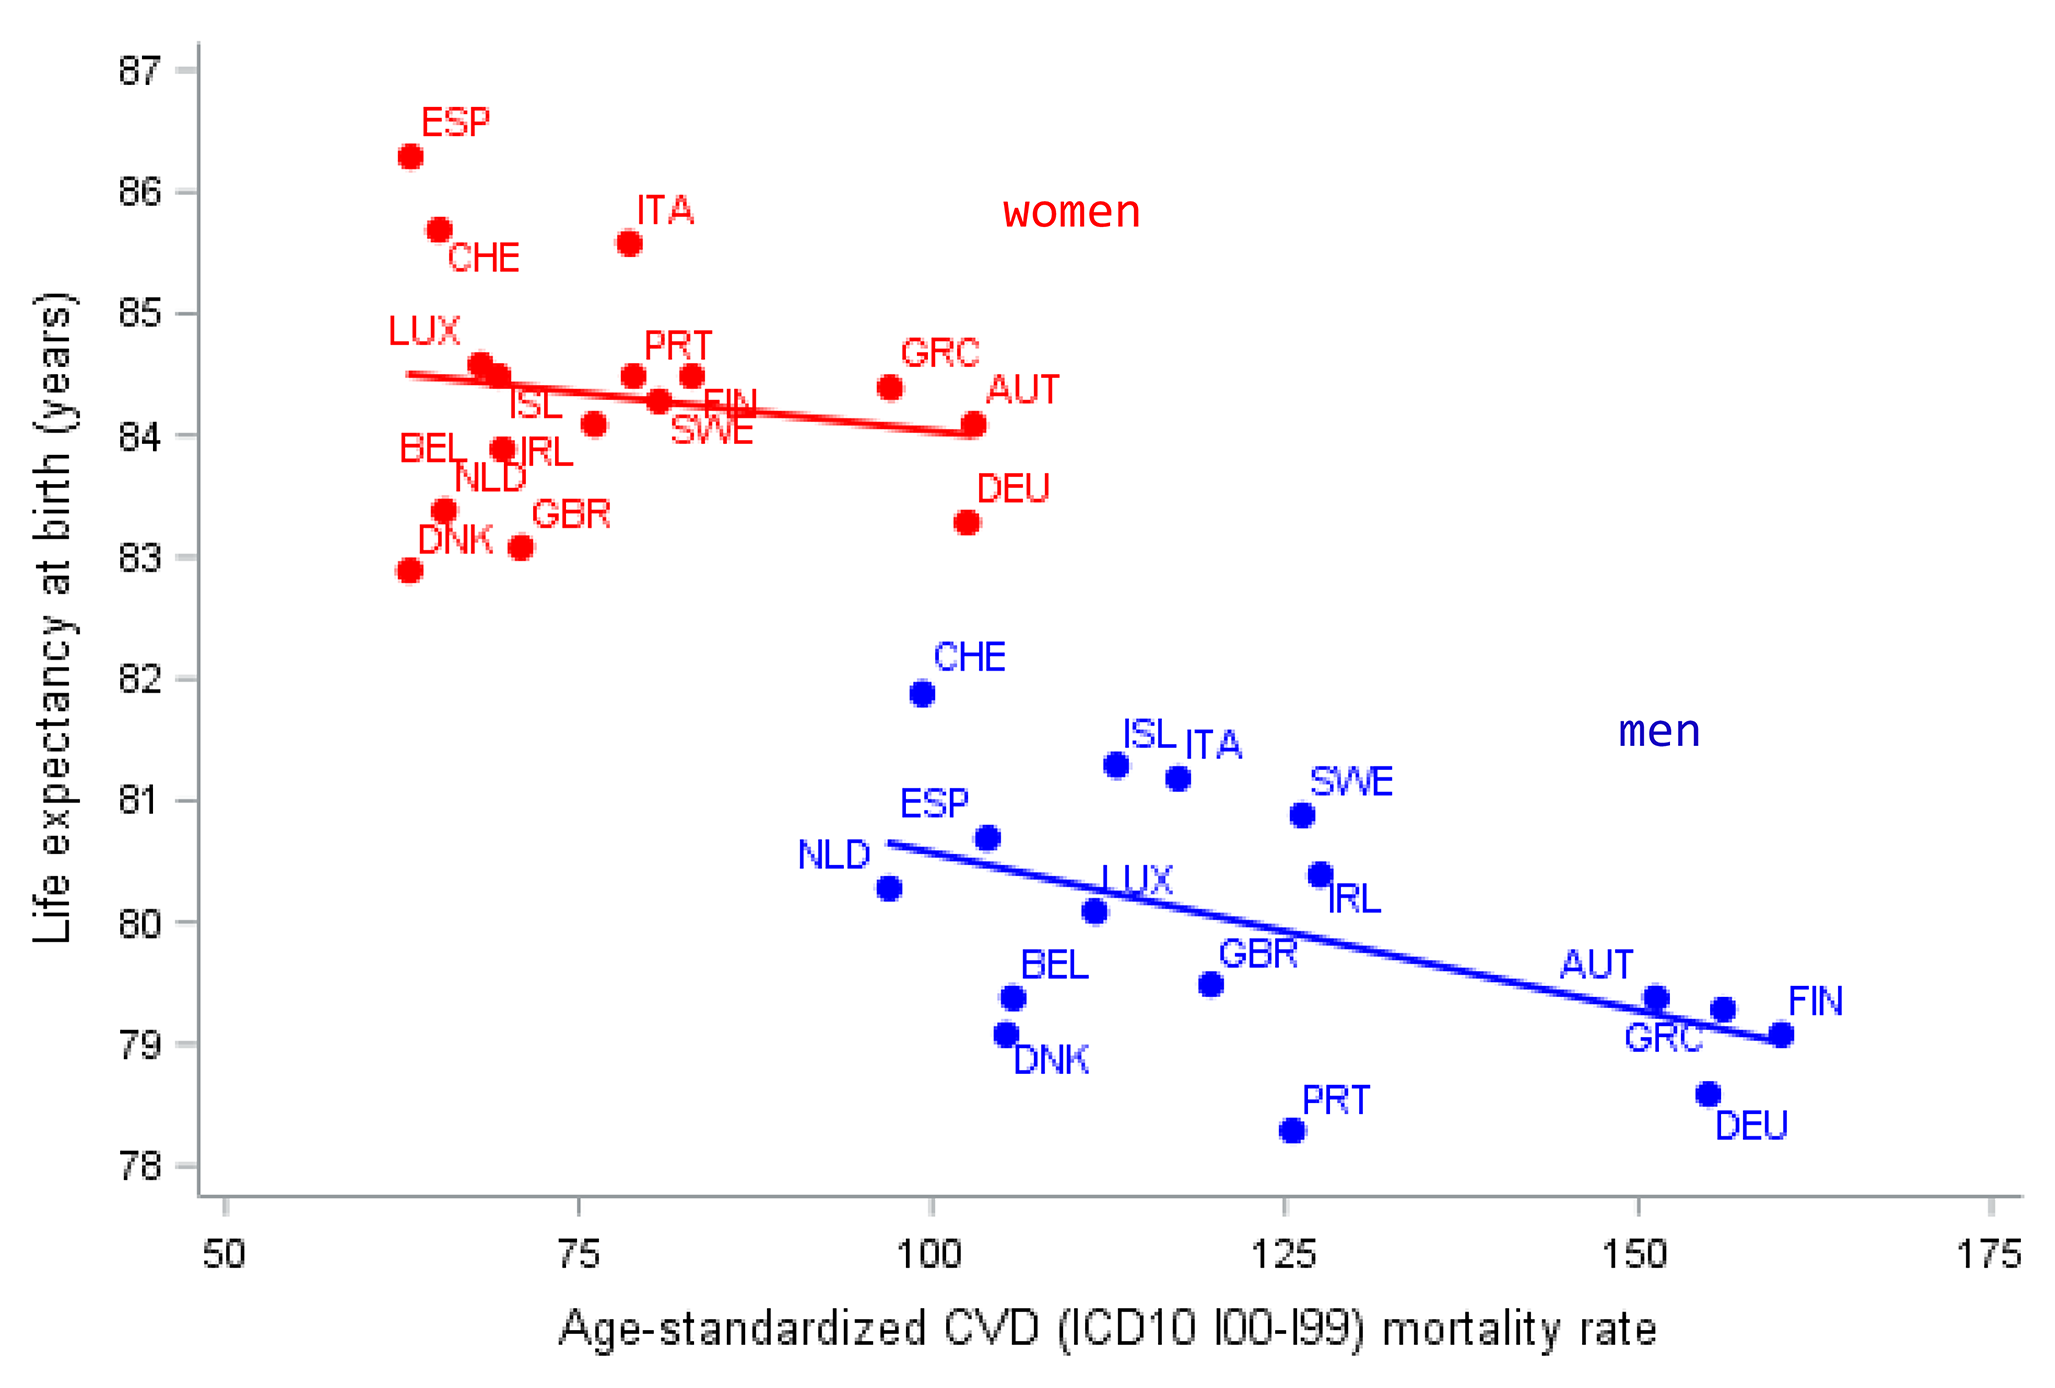 The pitfalls of focusing on cardiovascular disease mortality to explain differences in life expectancy